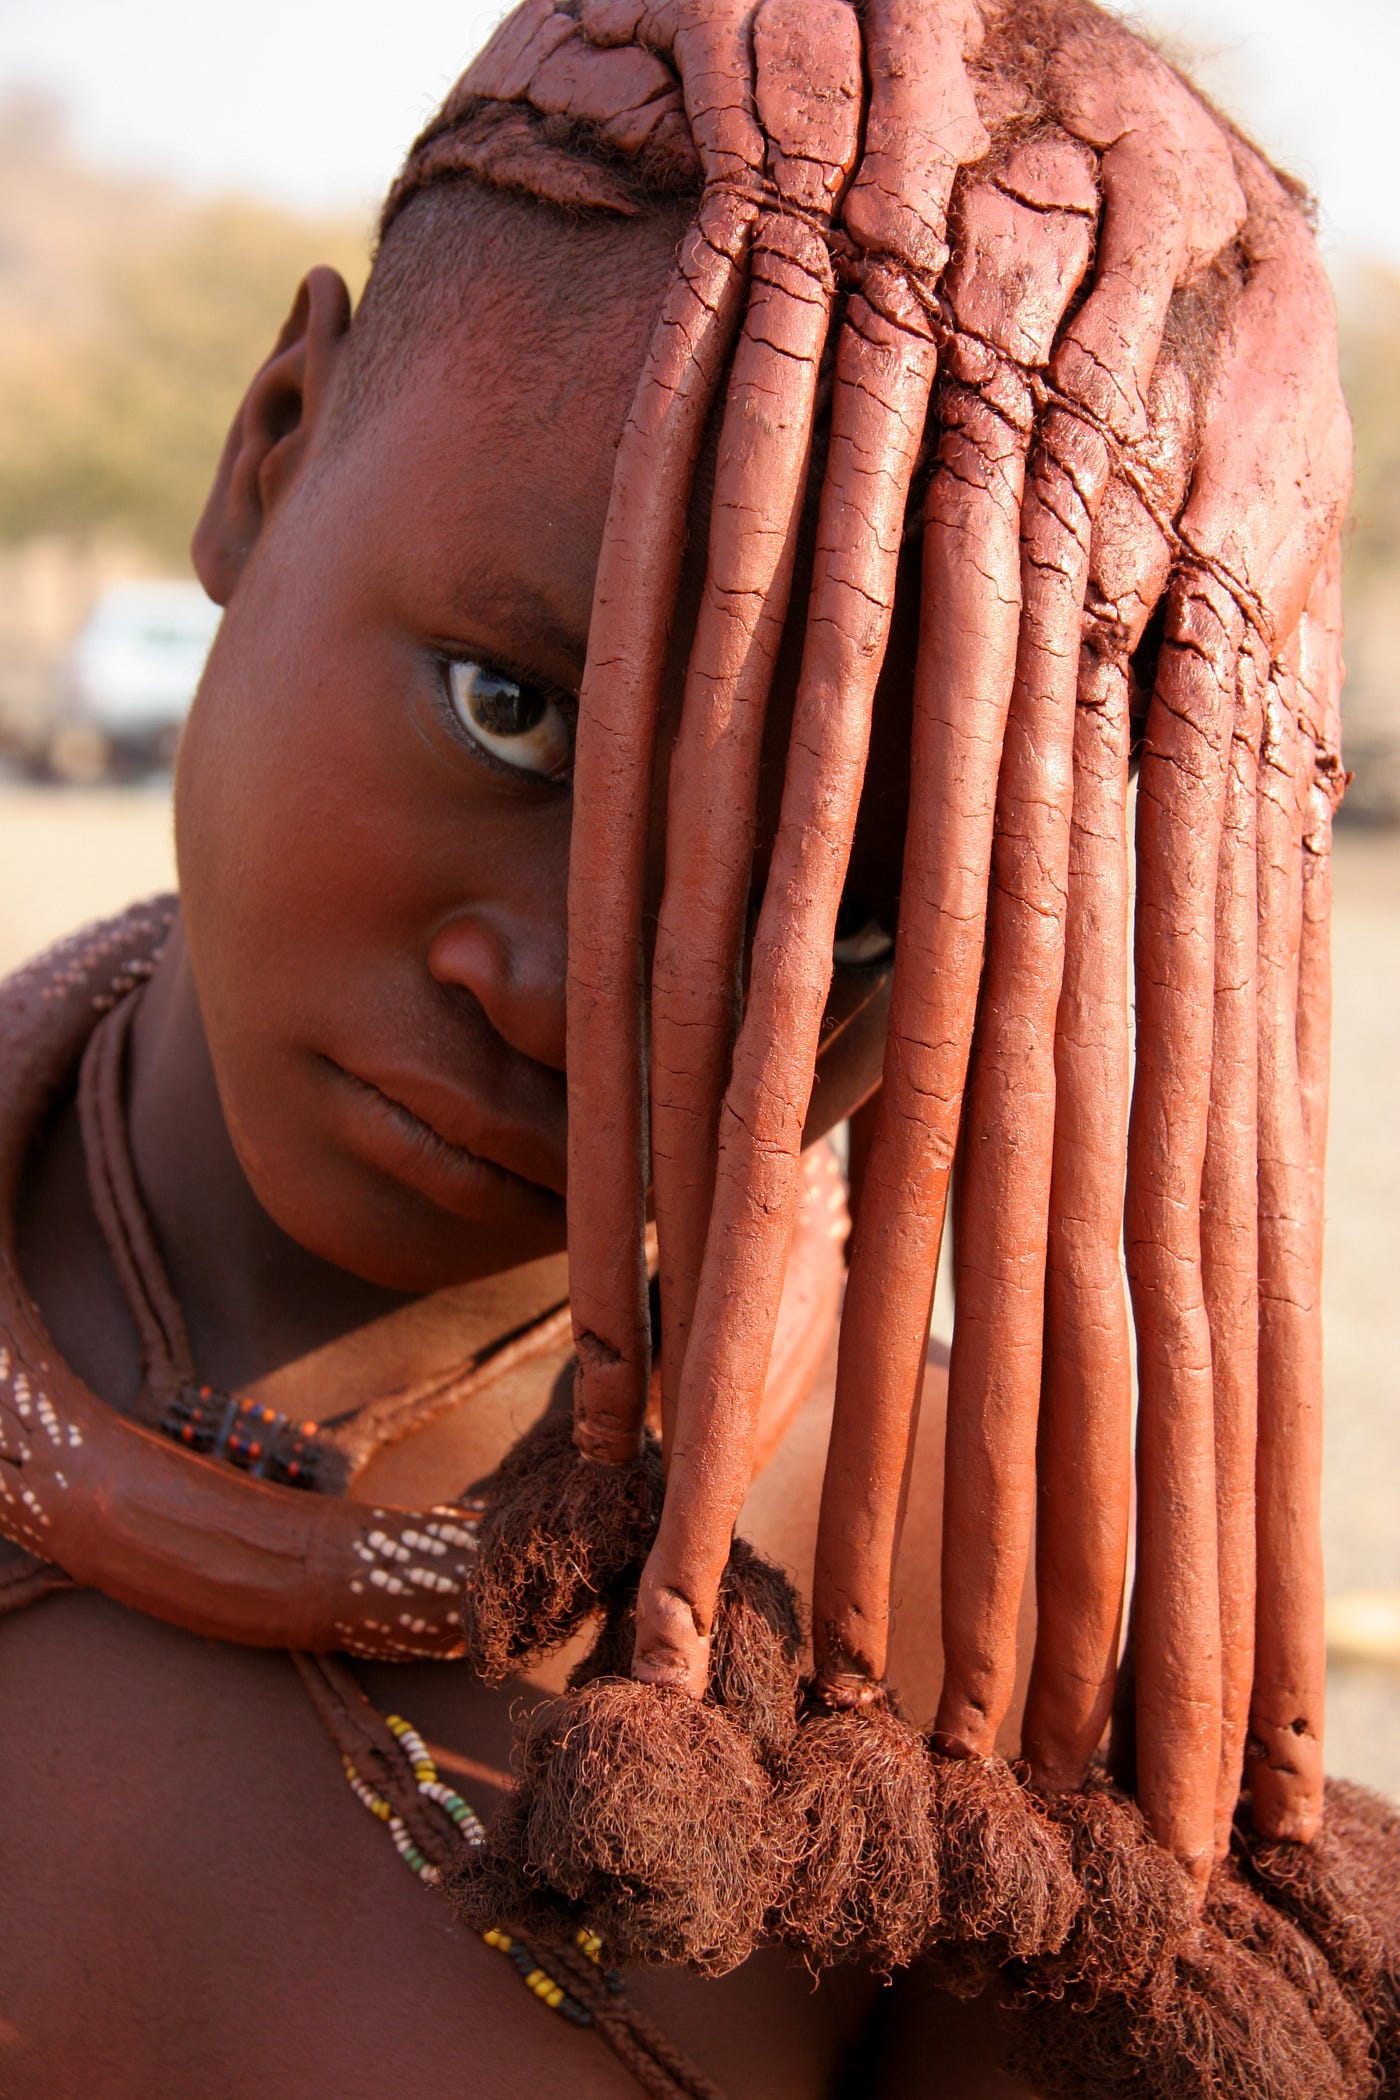 The Unique Hairdo Of Himba Women. Red Ochre — The Color of Earth